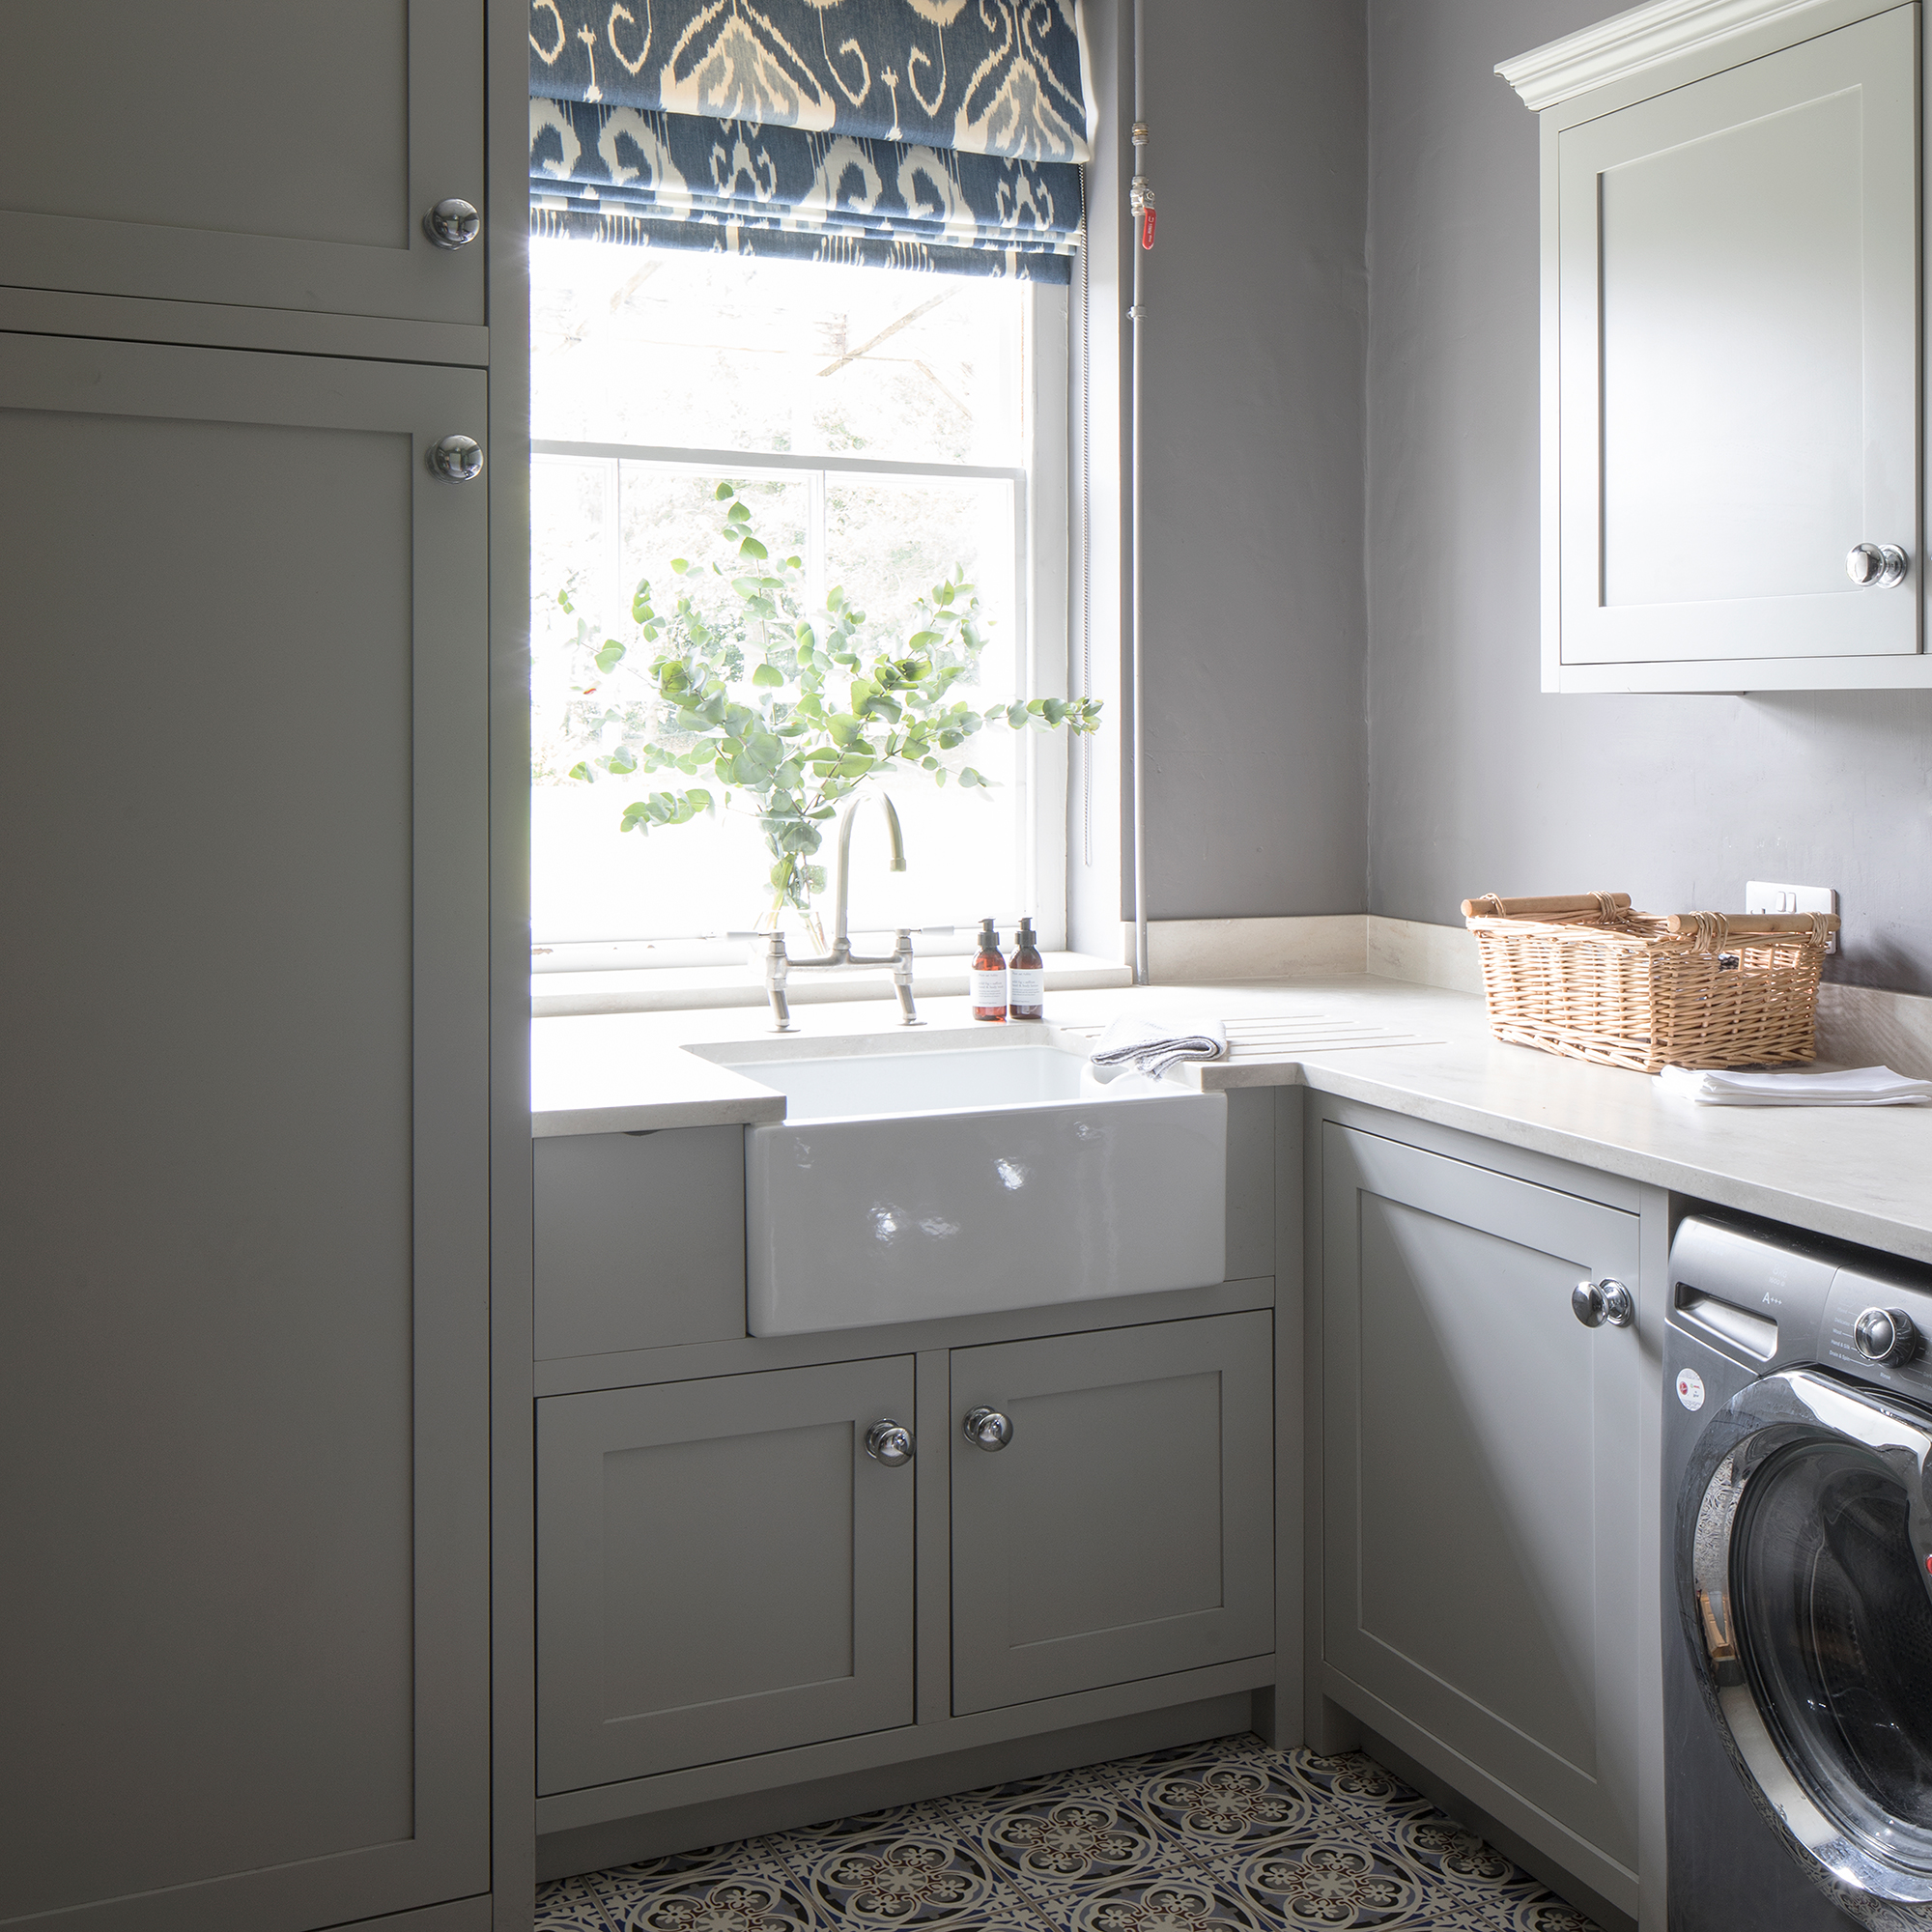 Grey utility room with Belfast sink, patterned tiled floor and patterned window blind